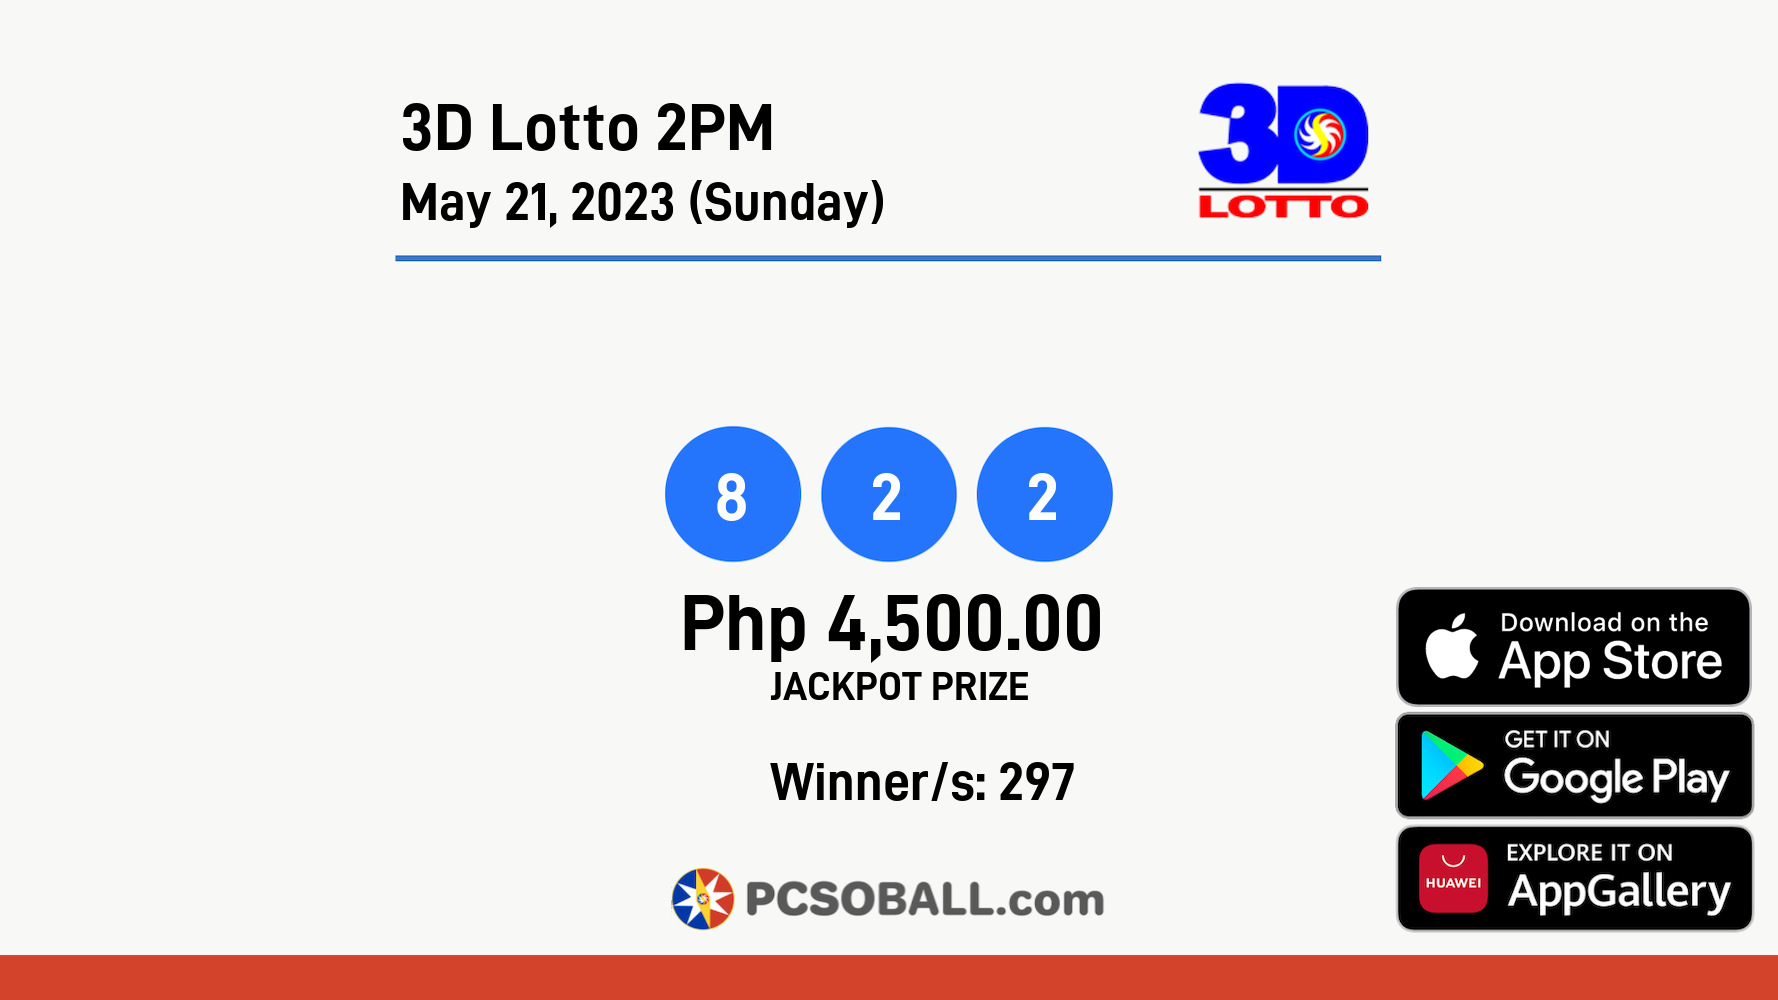 3D Lotto 2PM May 21, 2023 (Sunday) Result